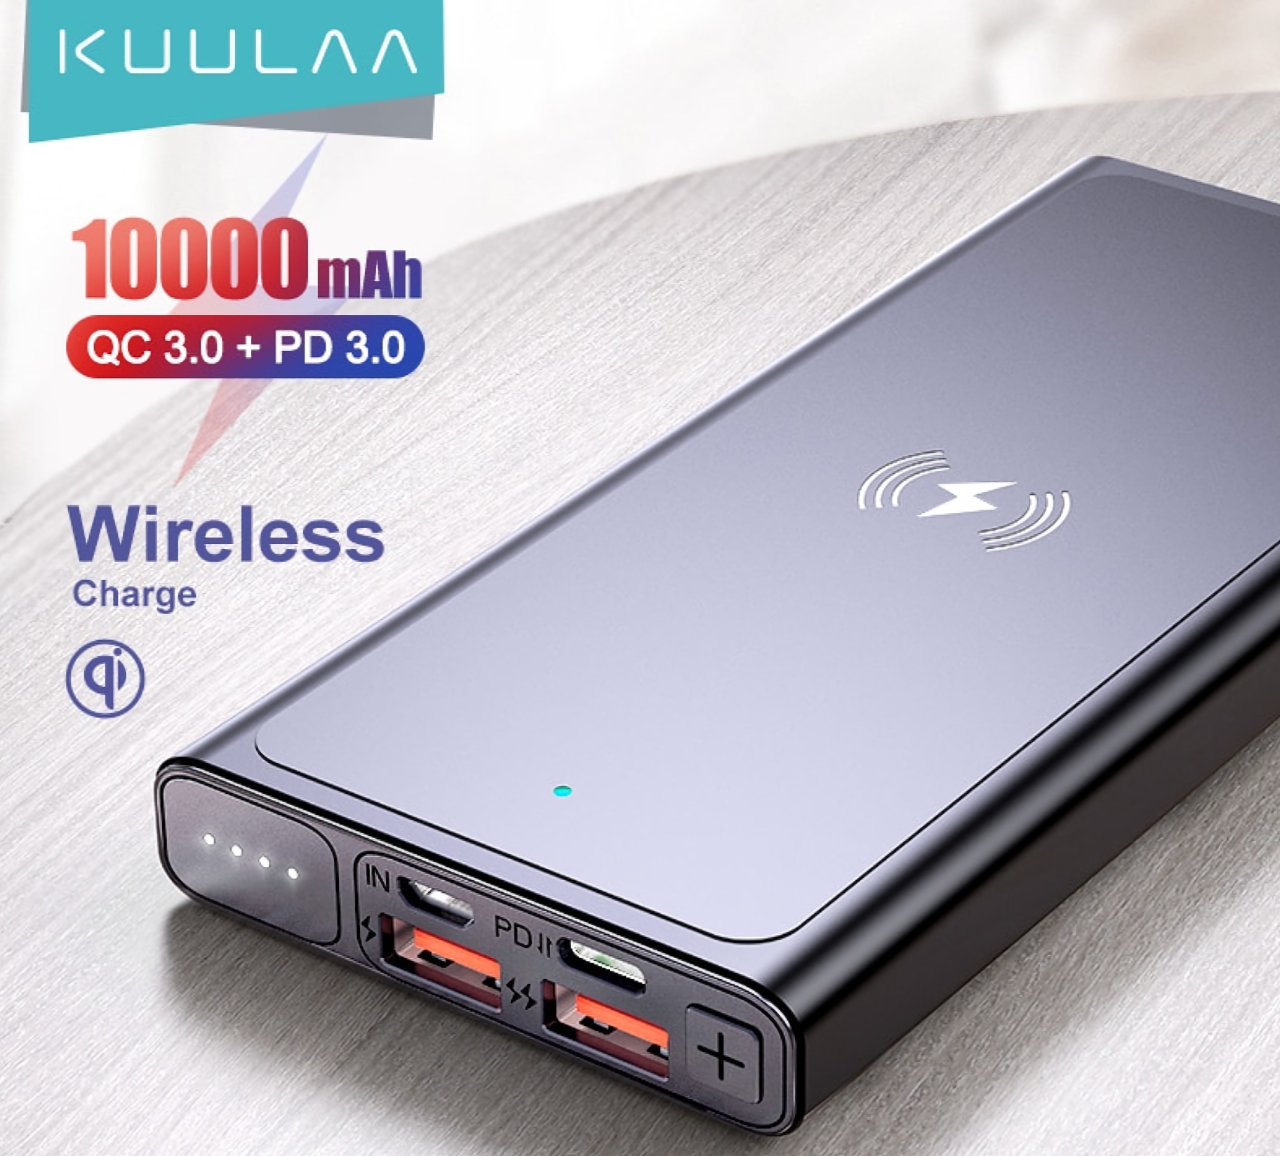 KUULAA 10000mAh Powerbank with four ports and wireless charging for $15